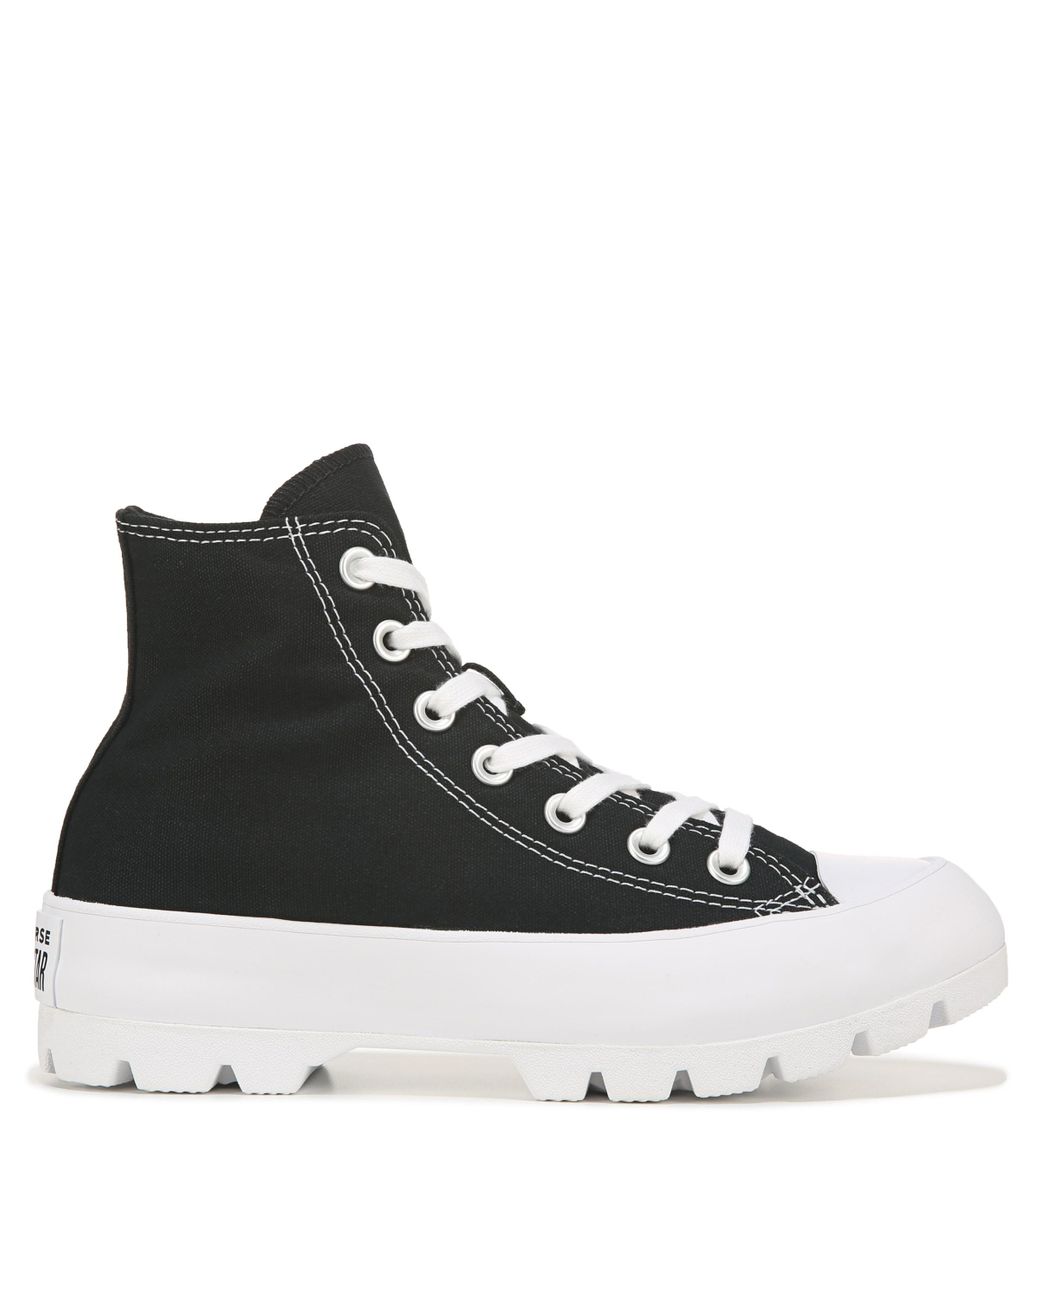 Converse Canvas Chuck Taylor All Star Lugged High Top Sneakers in Black ...